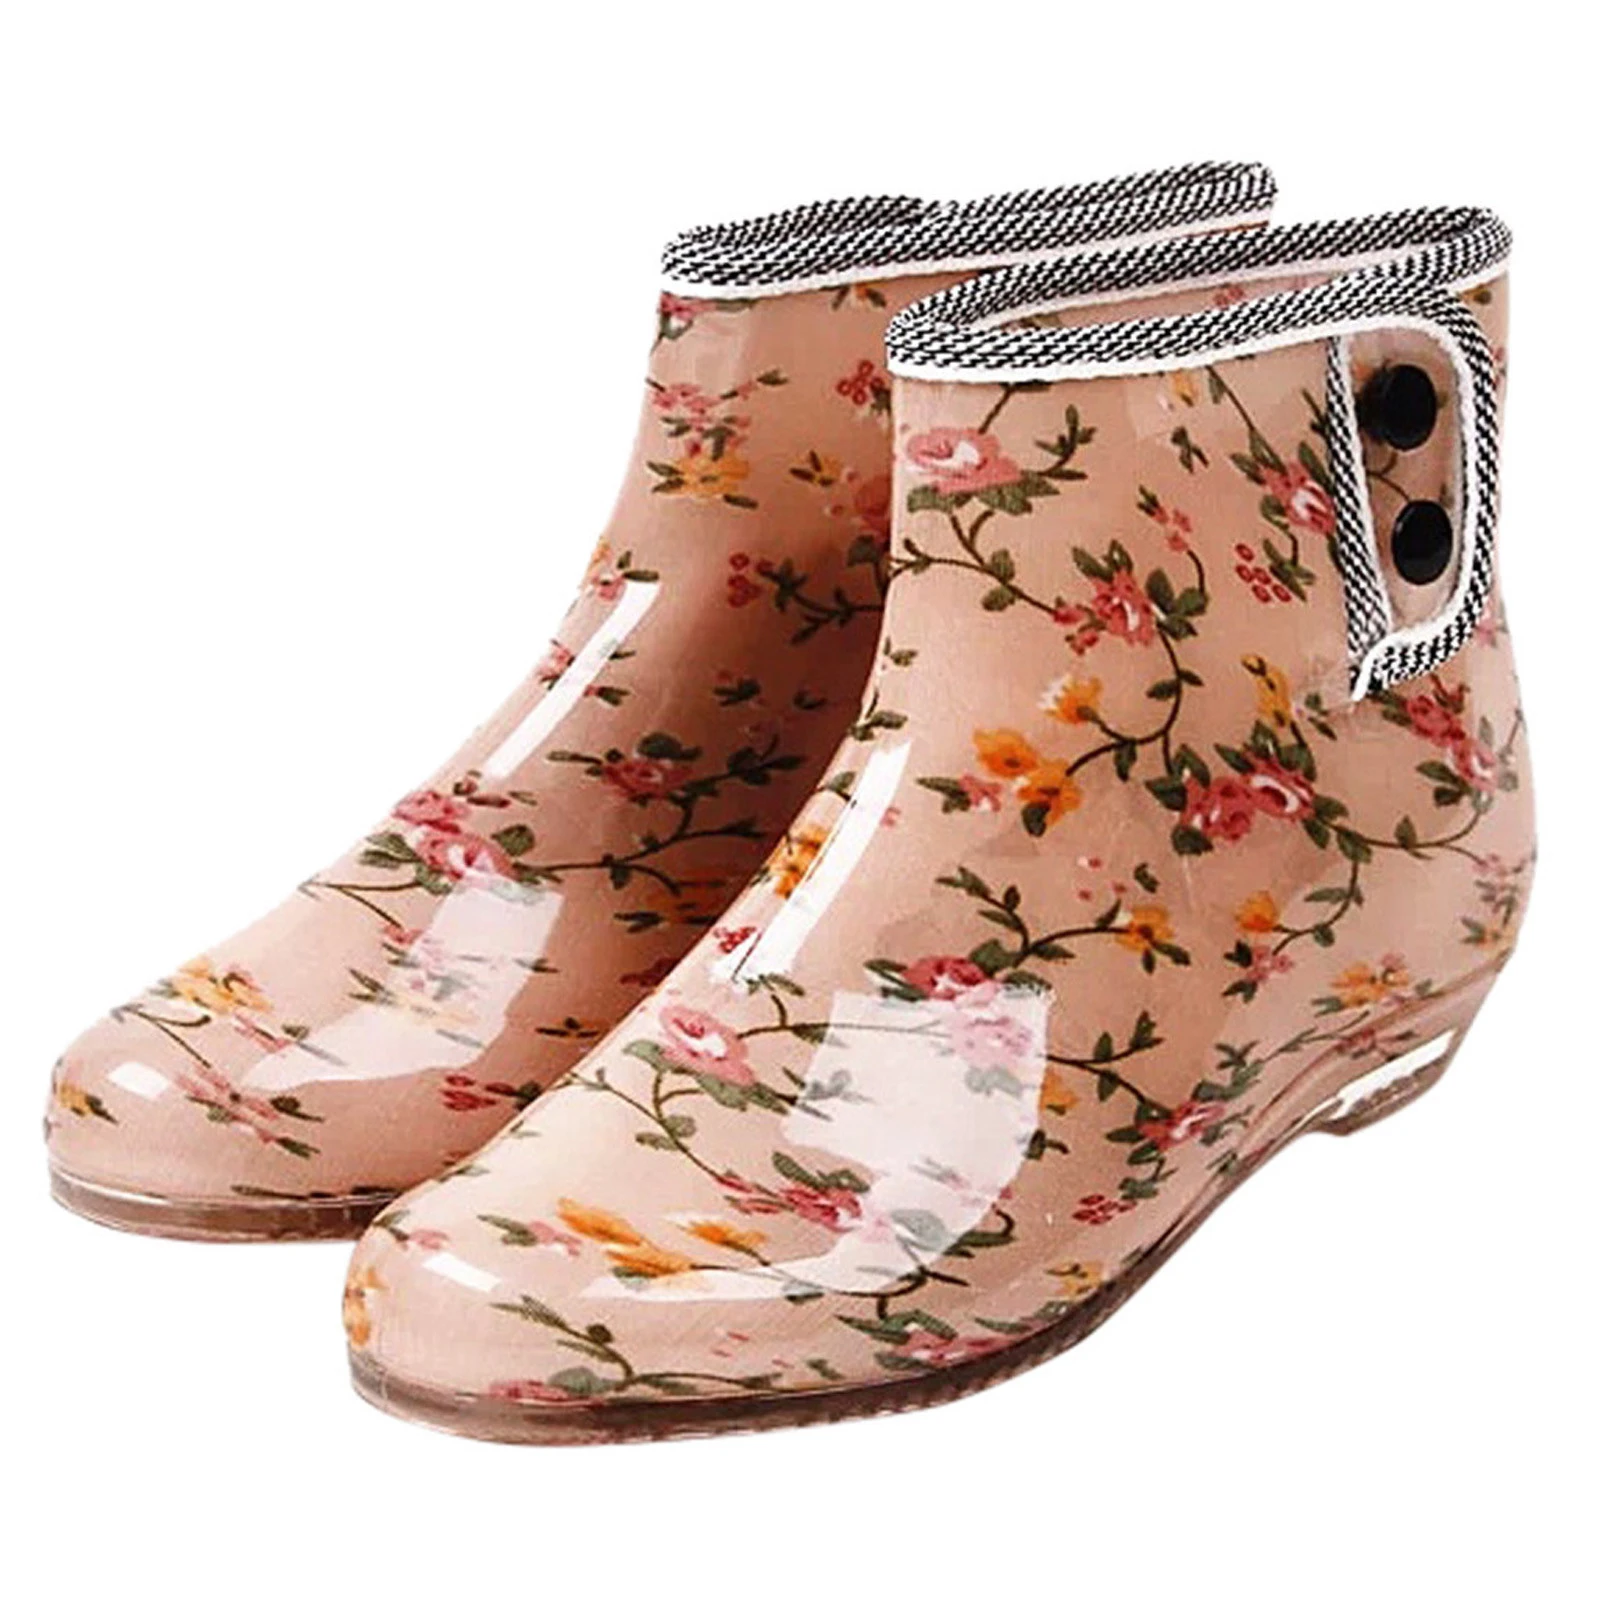 new design Women's Printed Short Rain Boots Fashion Short Tube Rain Boots  Water Slip Resistant Water Shoe Ladies Booties Femme|Ankle Boots| -  AliExpress